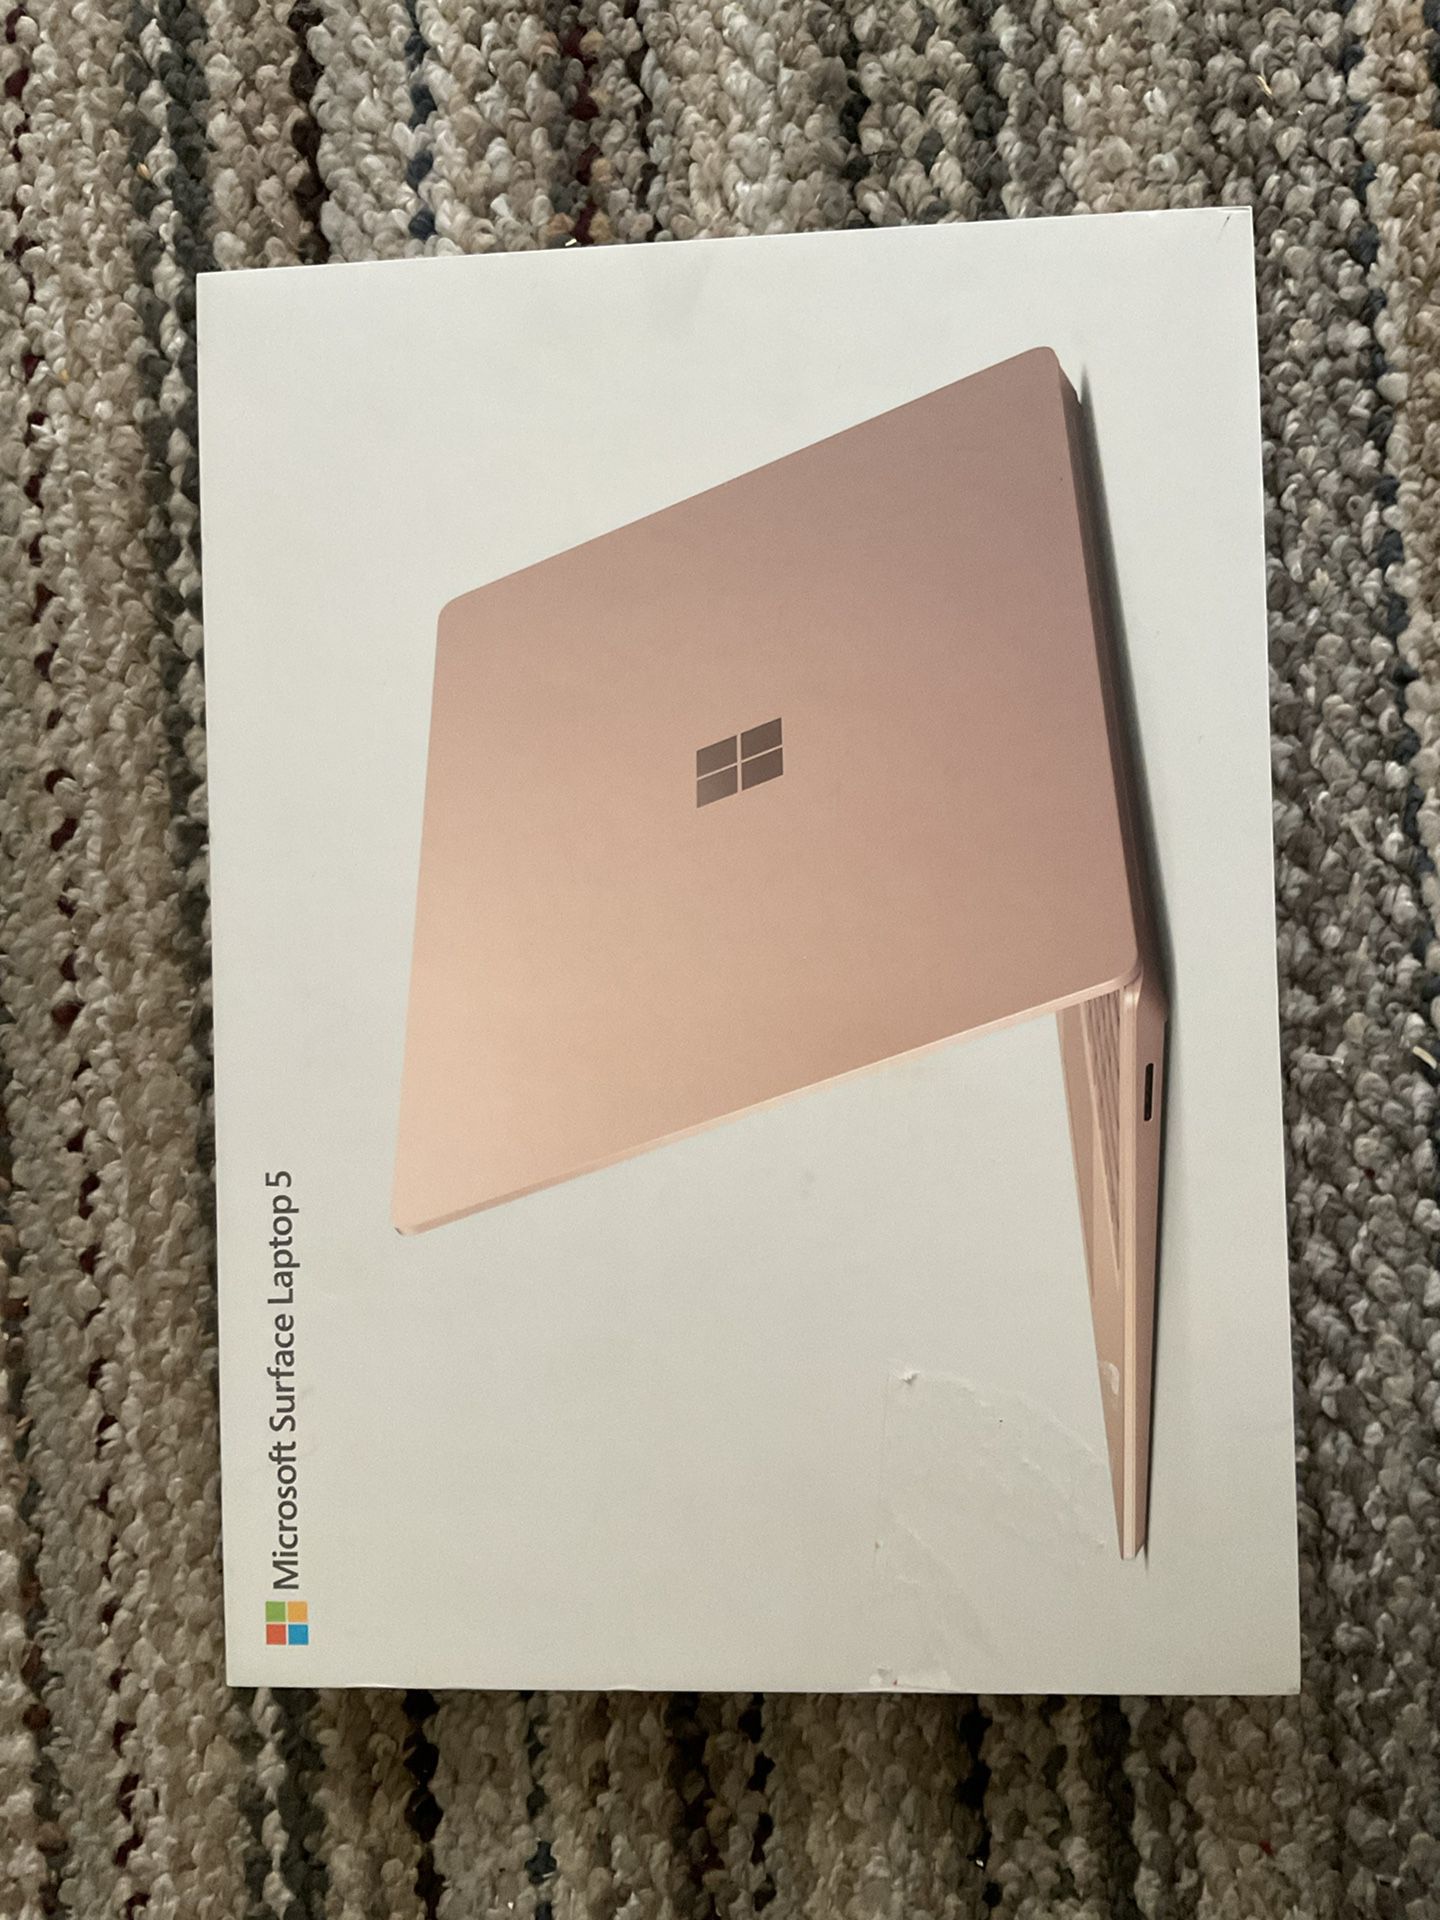 Microsoft Surface Laptop 5 (2022), 13.5" Touch Screen, Thin & Lightweight, Long Battery Life, Fast Intel i5 Processor for Multi-Tasking, 256GB Storage